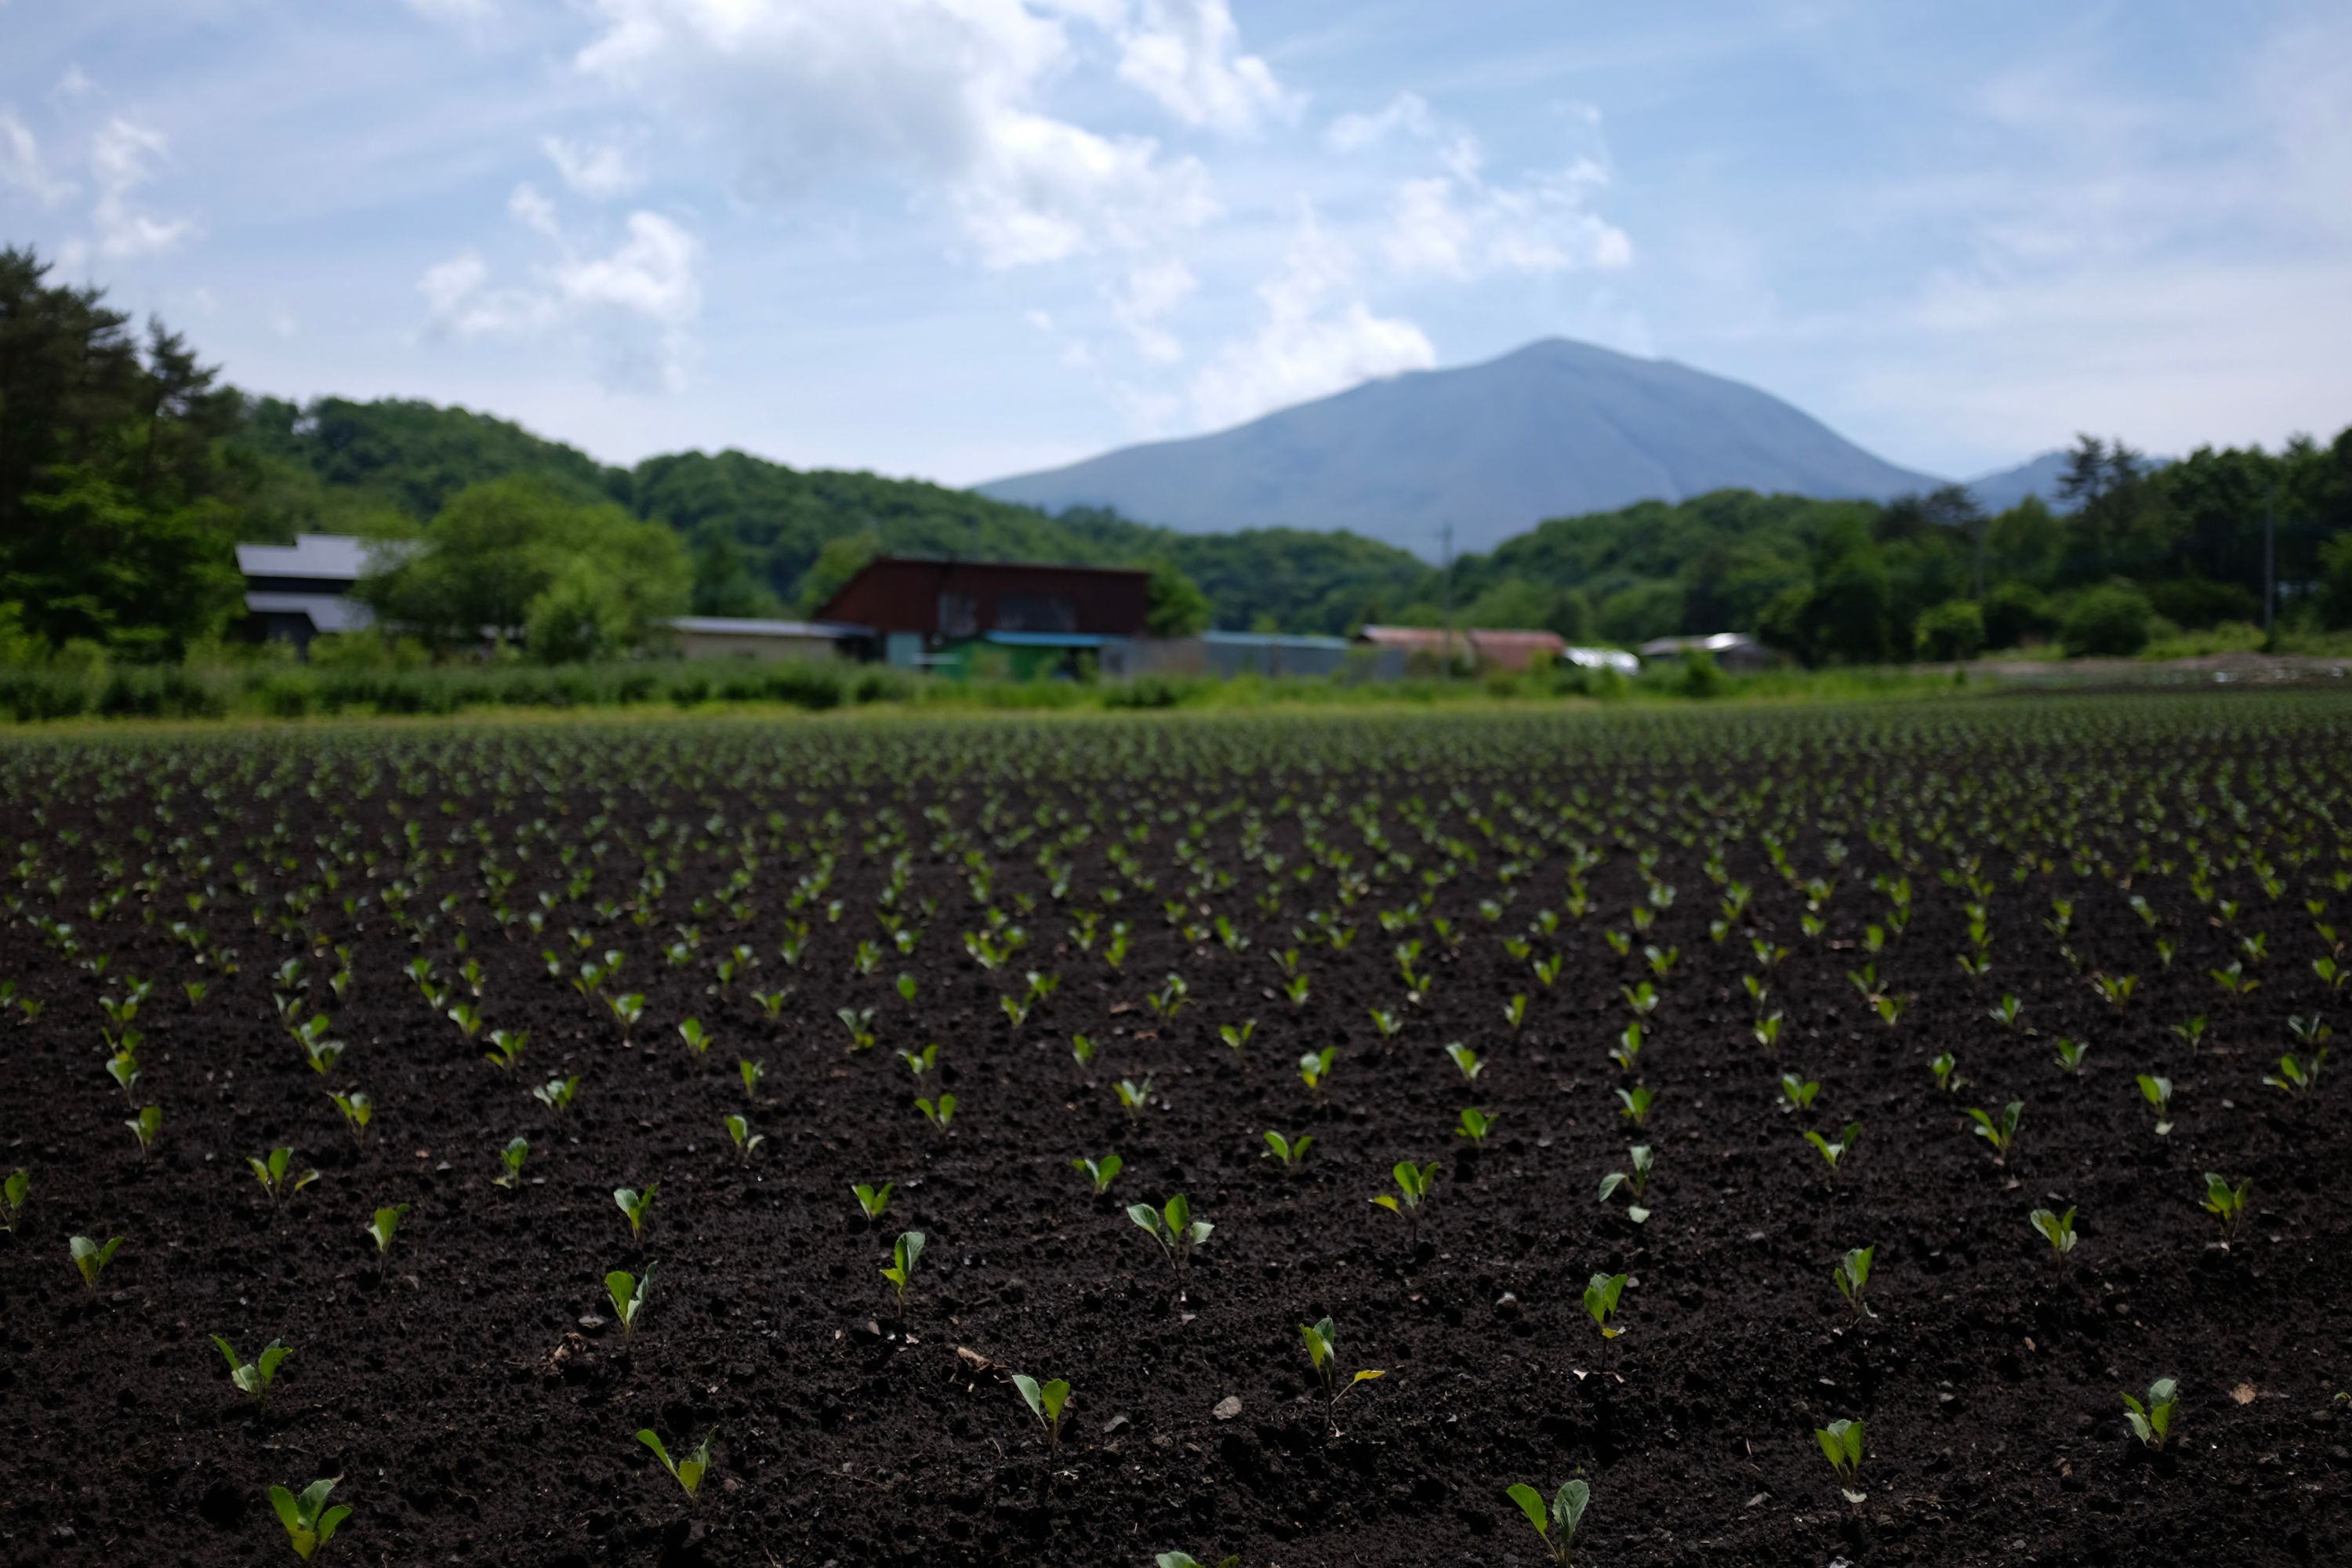 A big volcano, Mount Asama, behind a field with freshly sprouted plants.